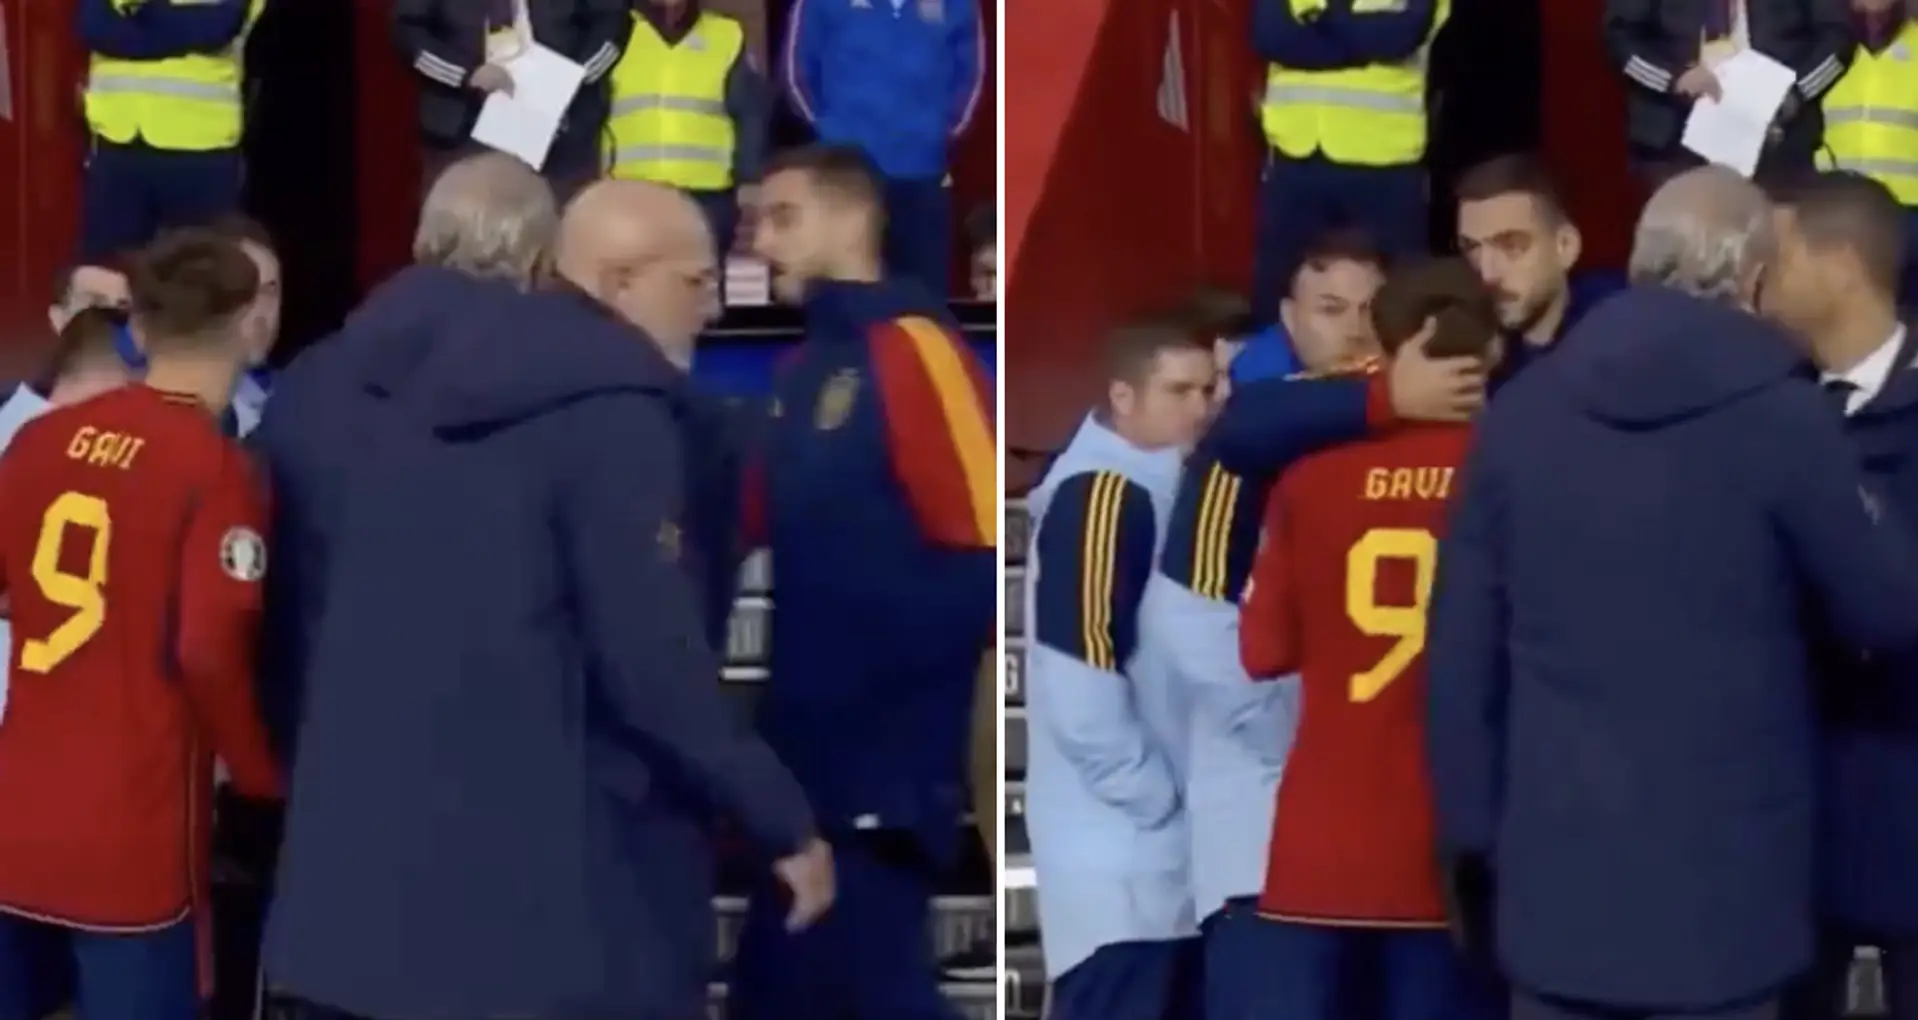 First player to comfort Gavi after leaving pitch spotted - he's not from Barca